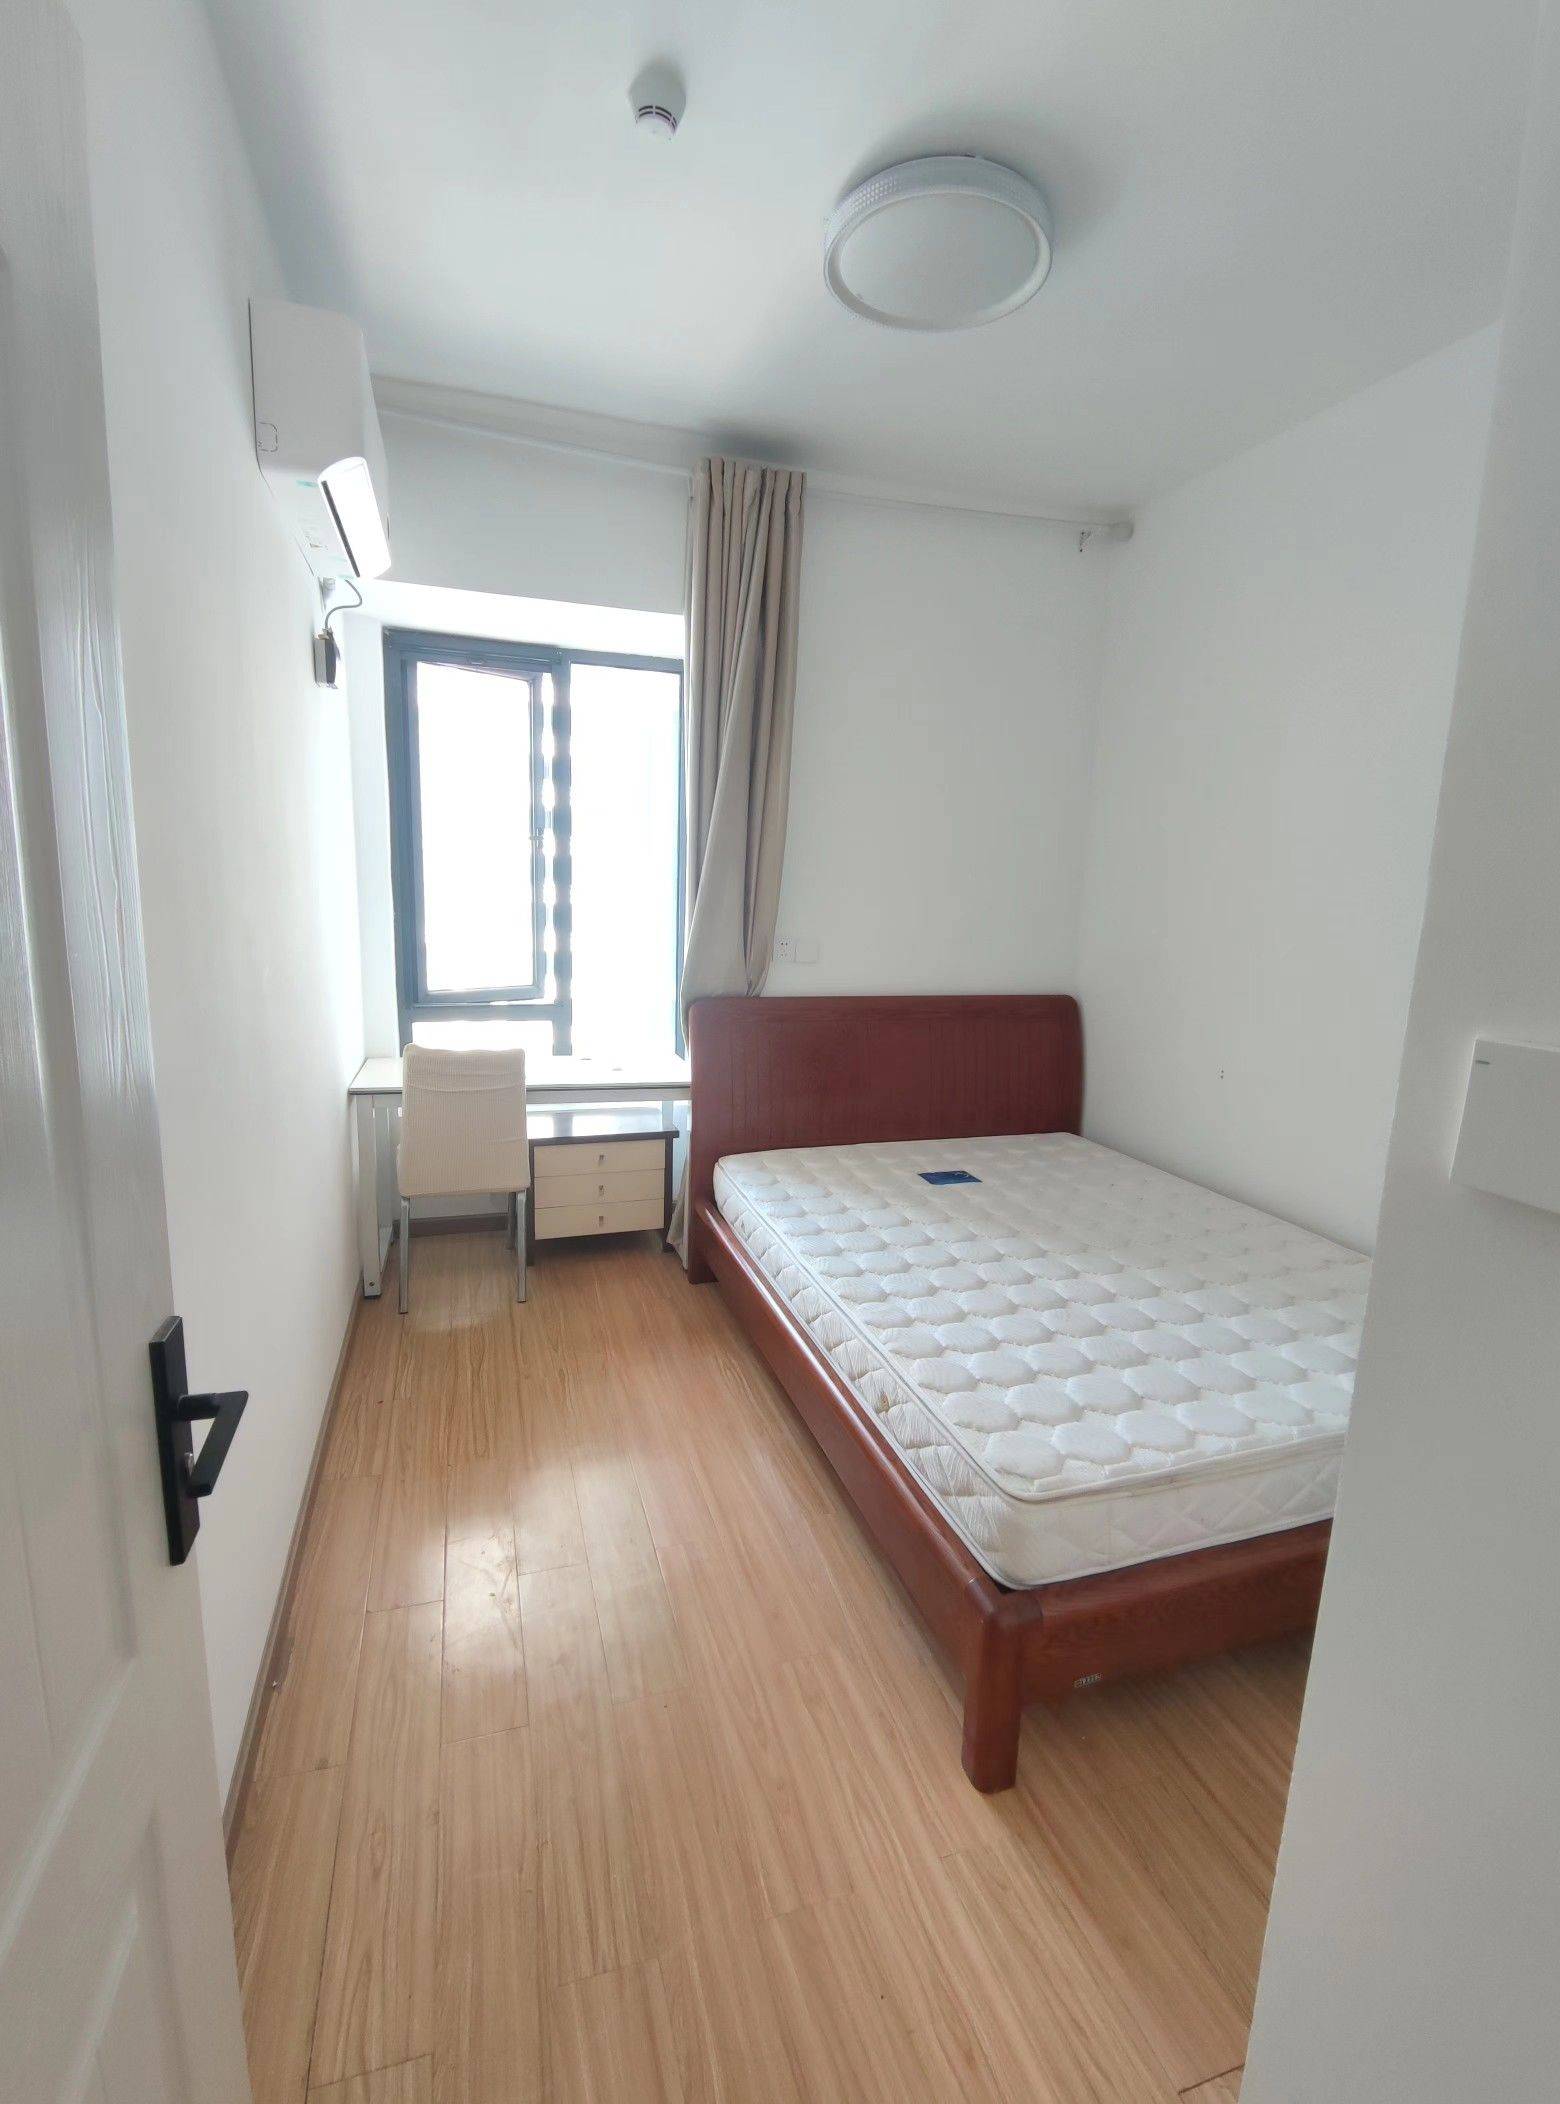 Wuhan-Jianghan-Cozy Home,Clean&Comfy,No Gender Limit